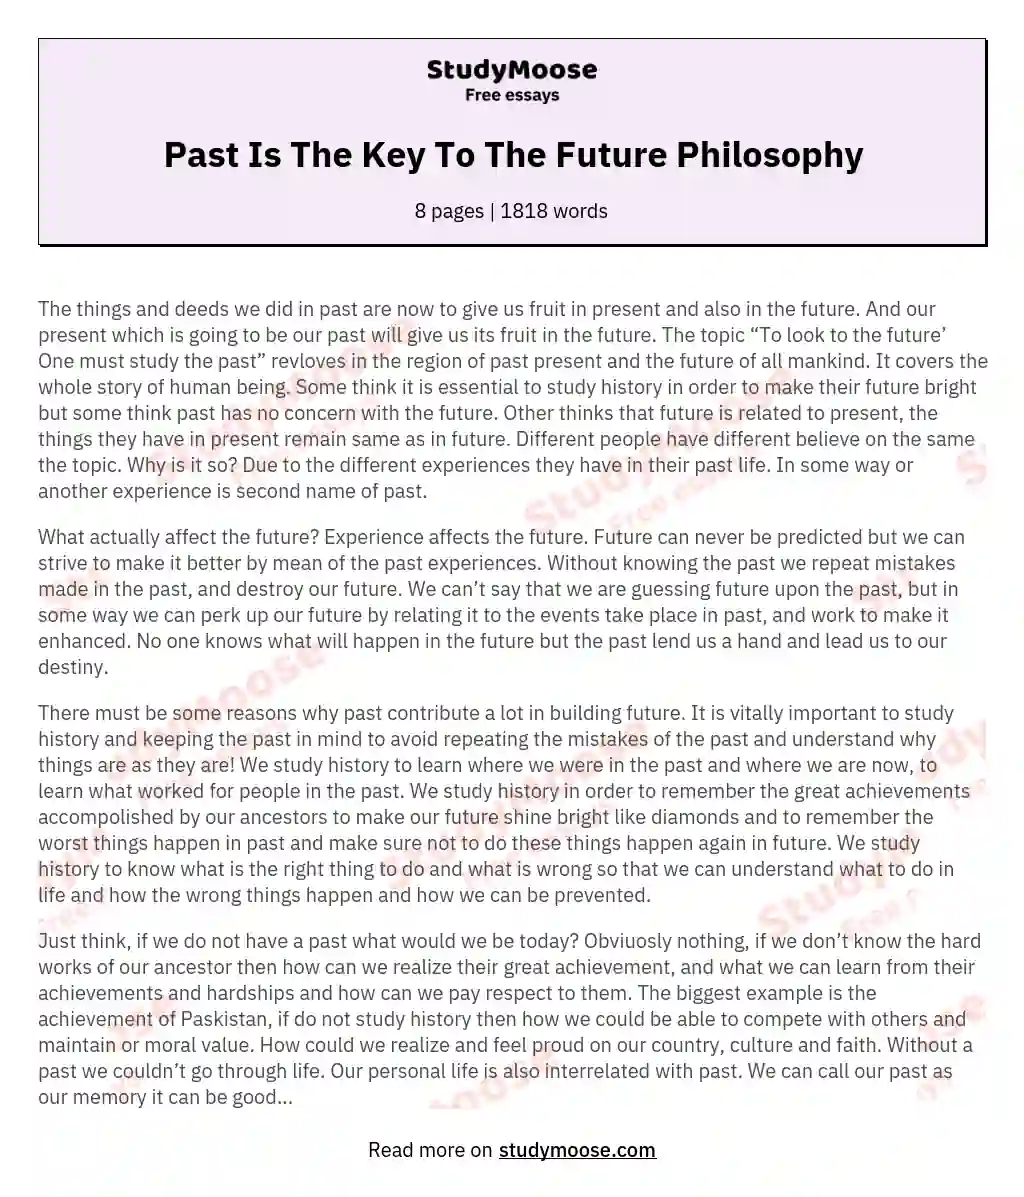 Past Is The Key To The Future Philosophy essay